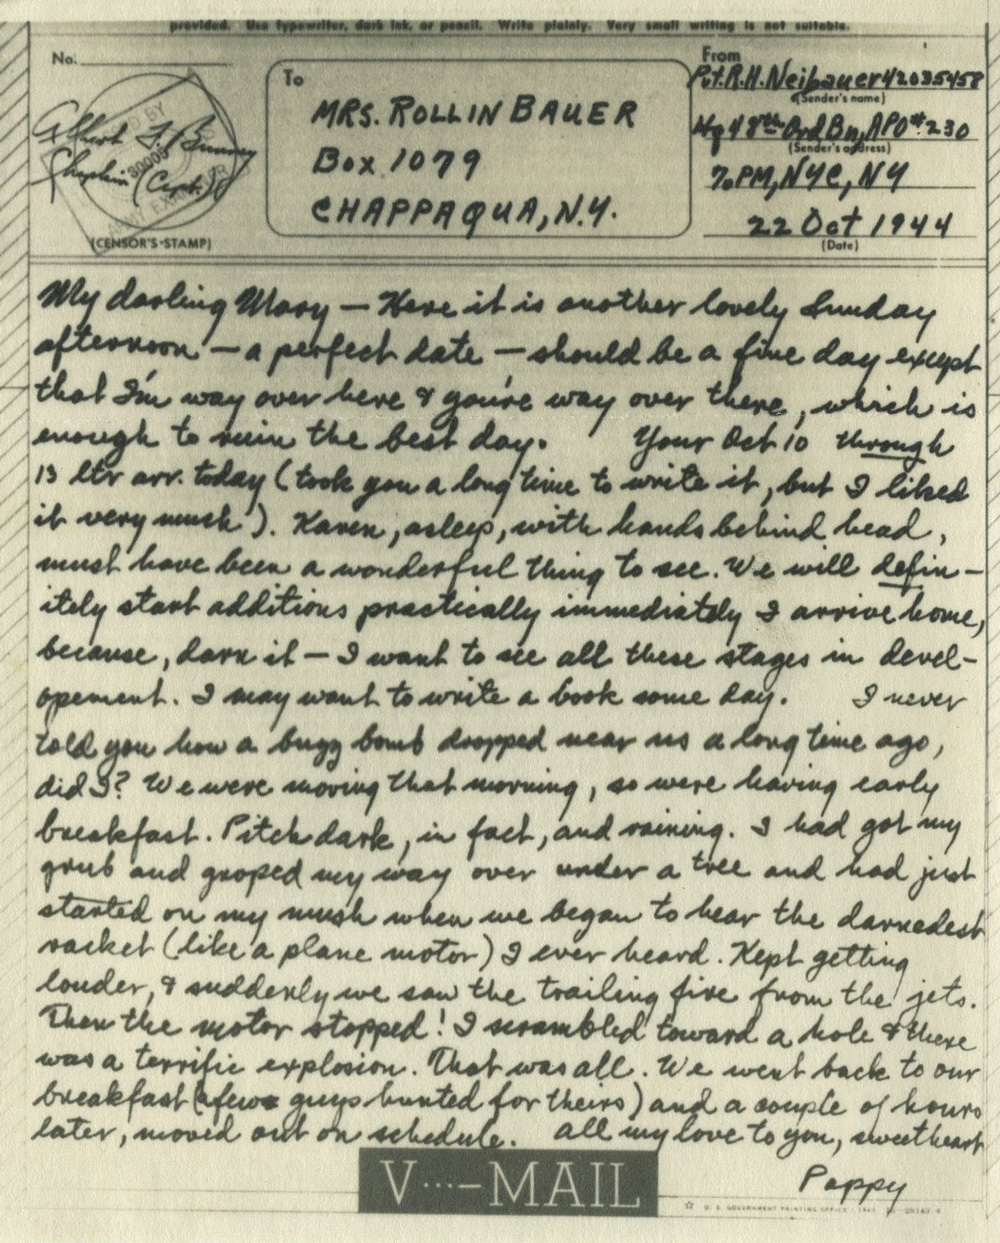 10-22-44-ww2-letters-mary-anne-erickson